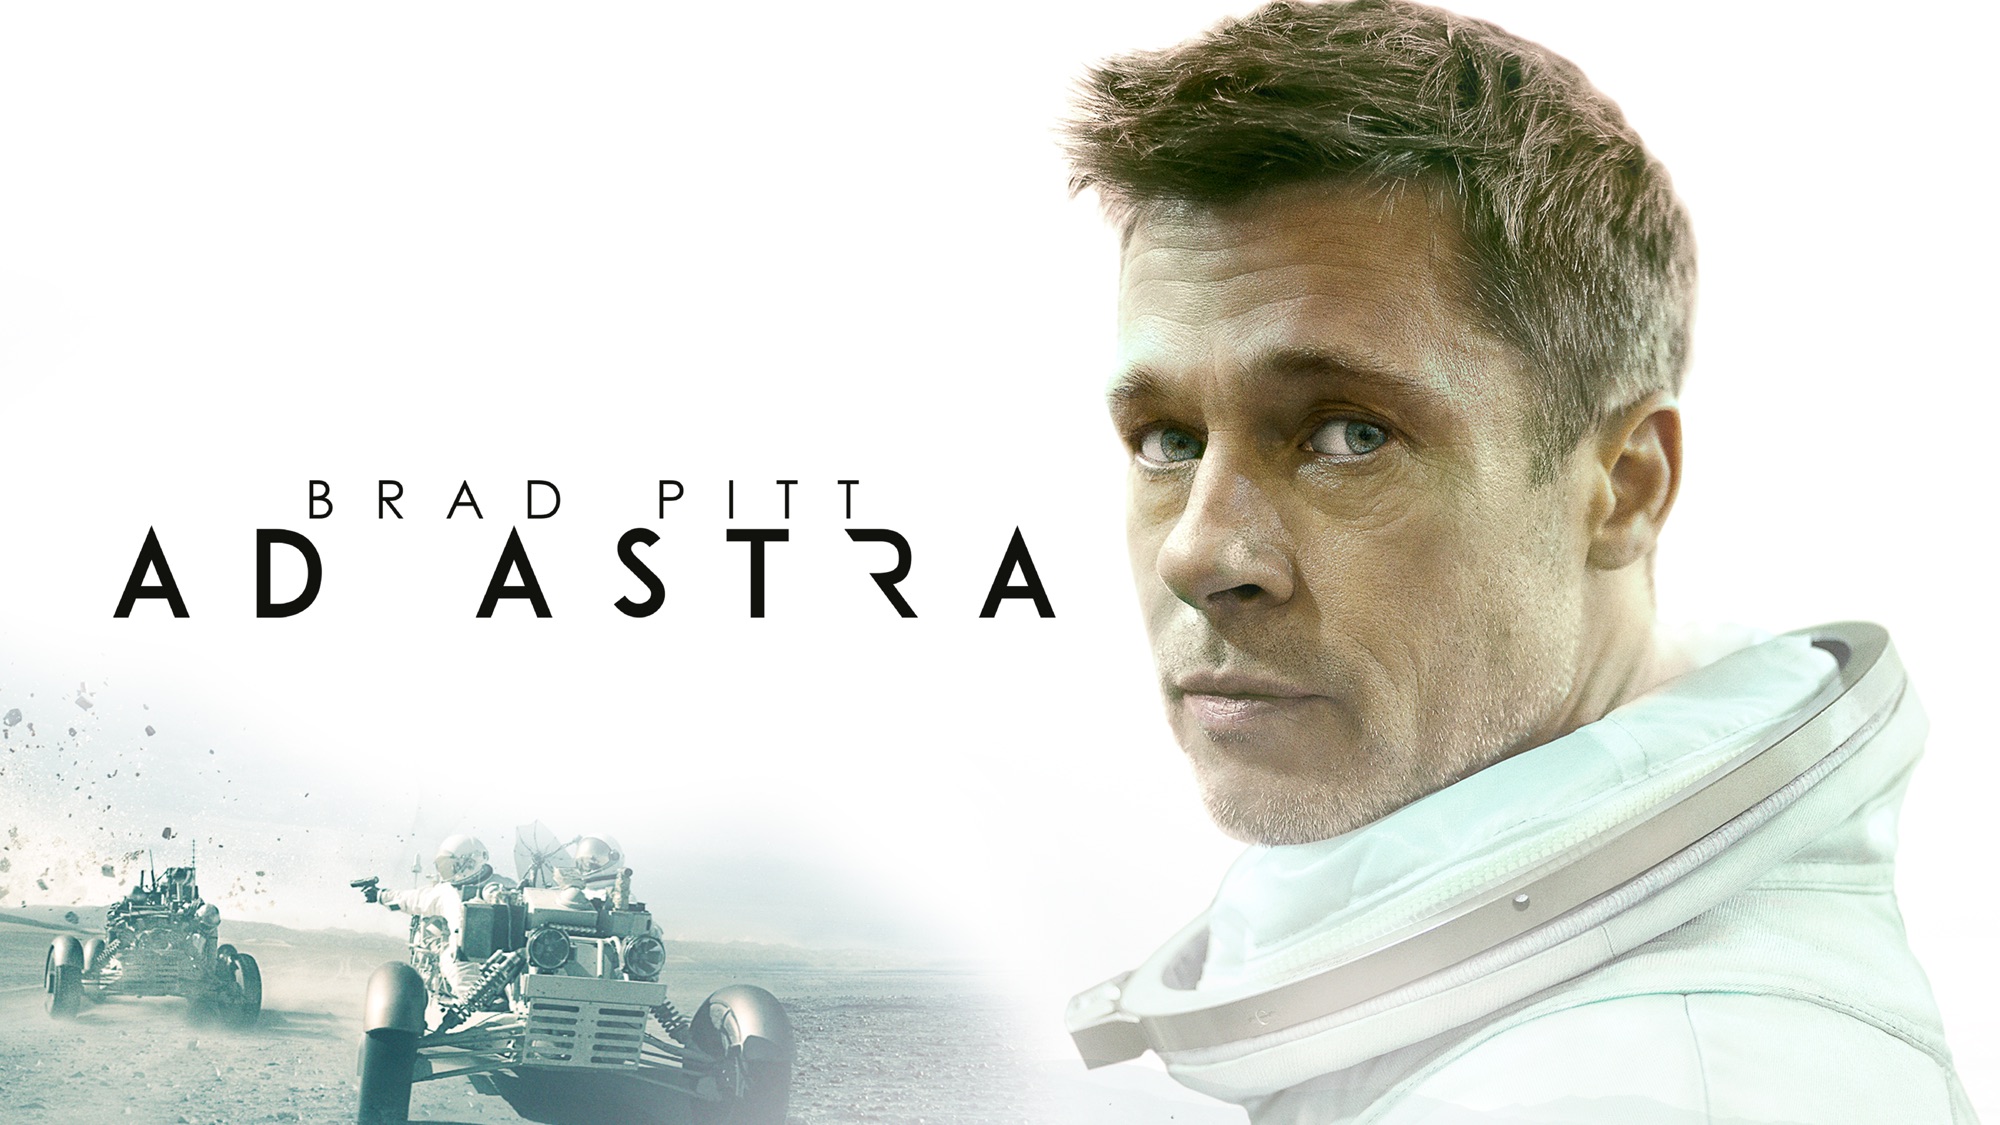 Ad Astra Movie Poster Wallpapers